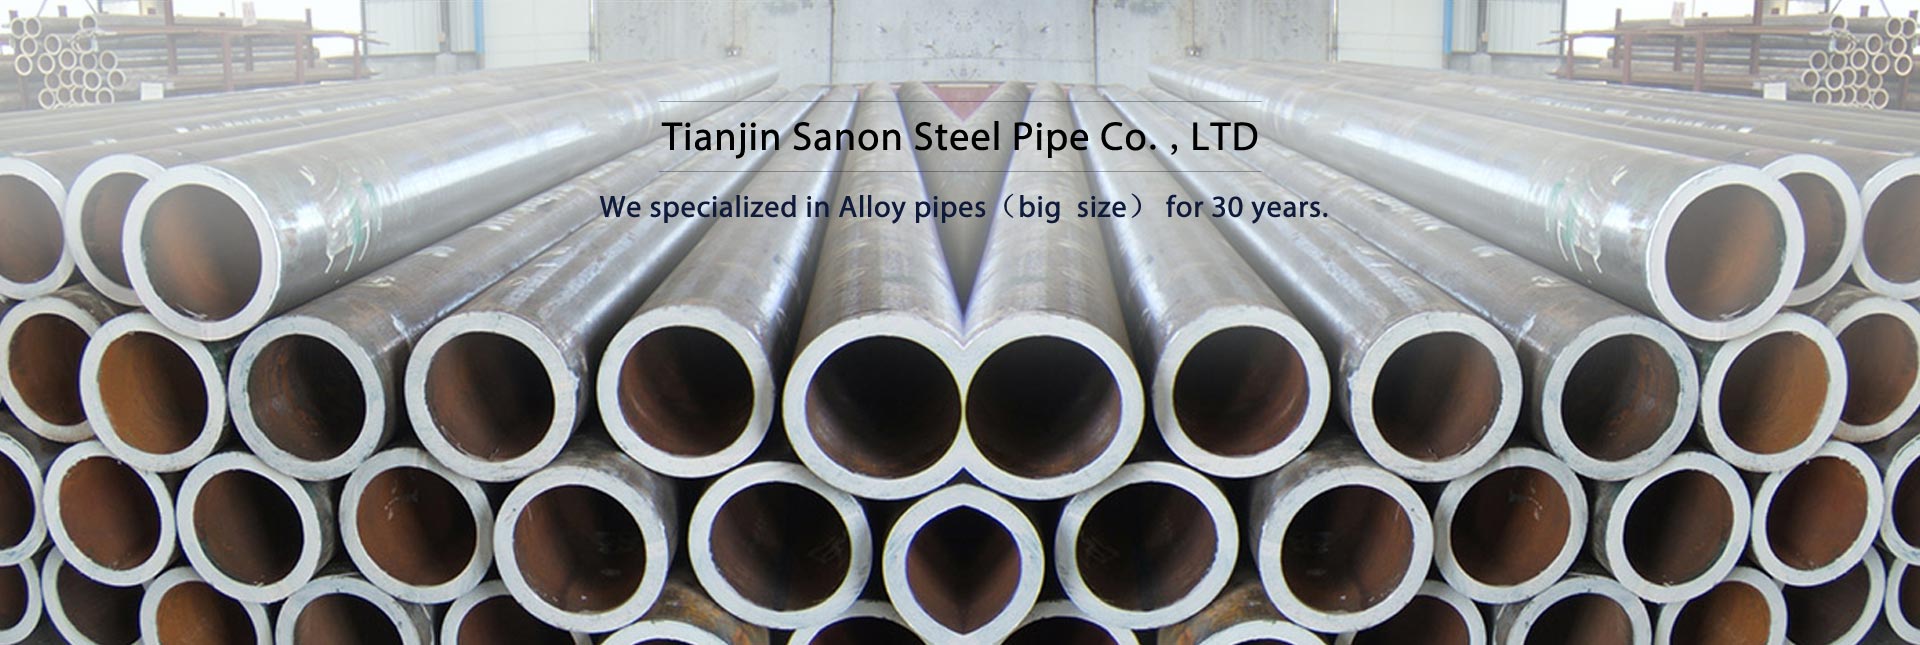 seamless steel tubes for high-pressure boilers